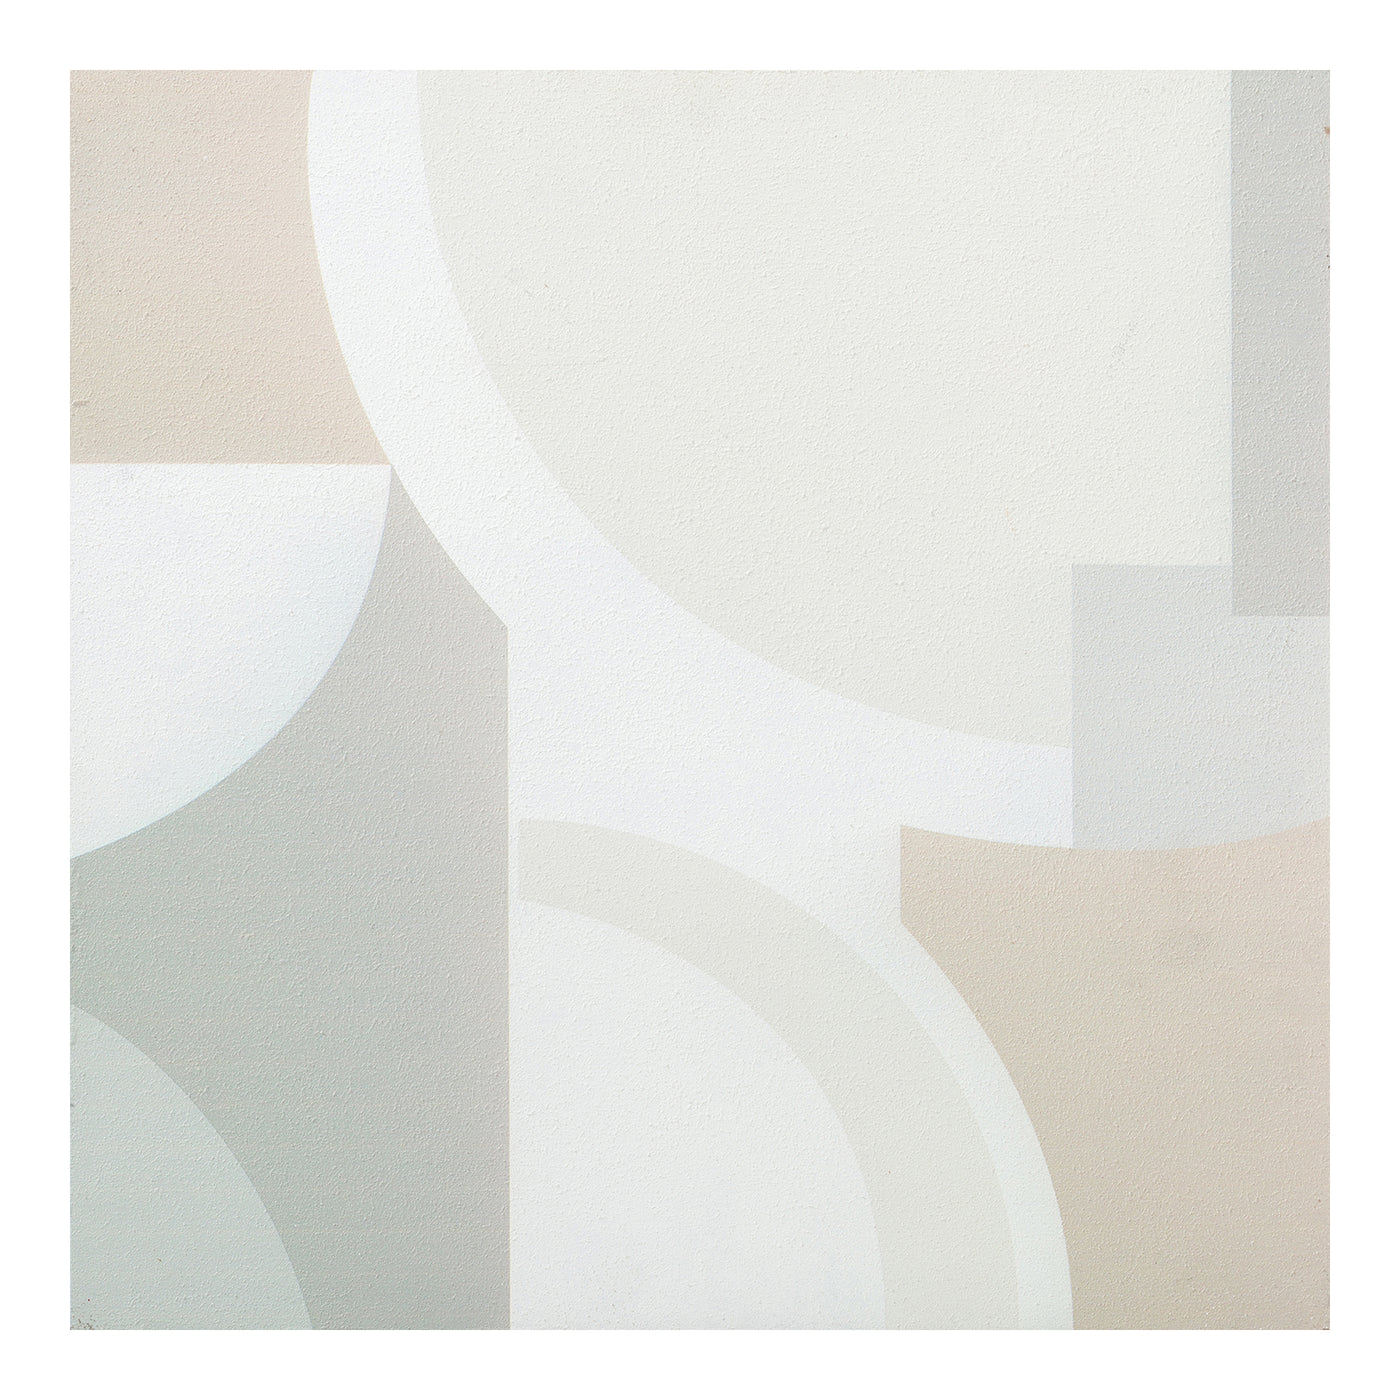 Organically abstract shapes blend peacefully alongside this wall art print's pastel hues to form a serene, natural attract...